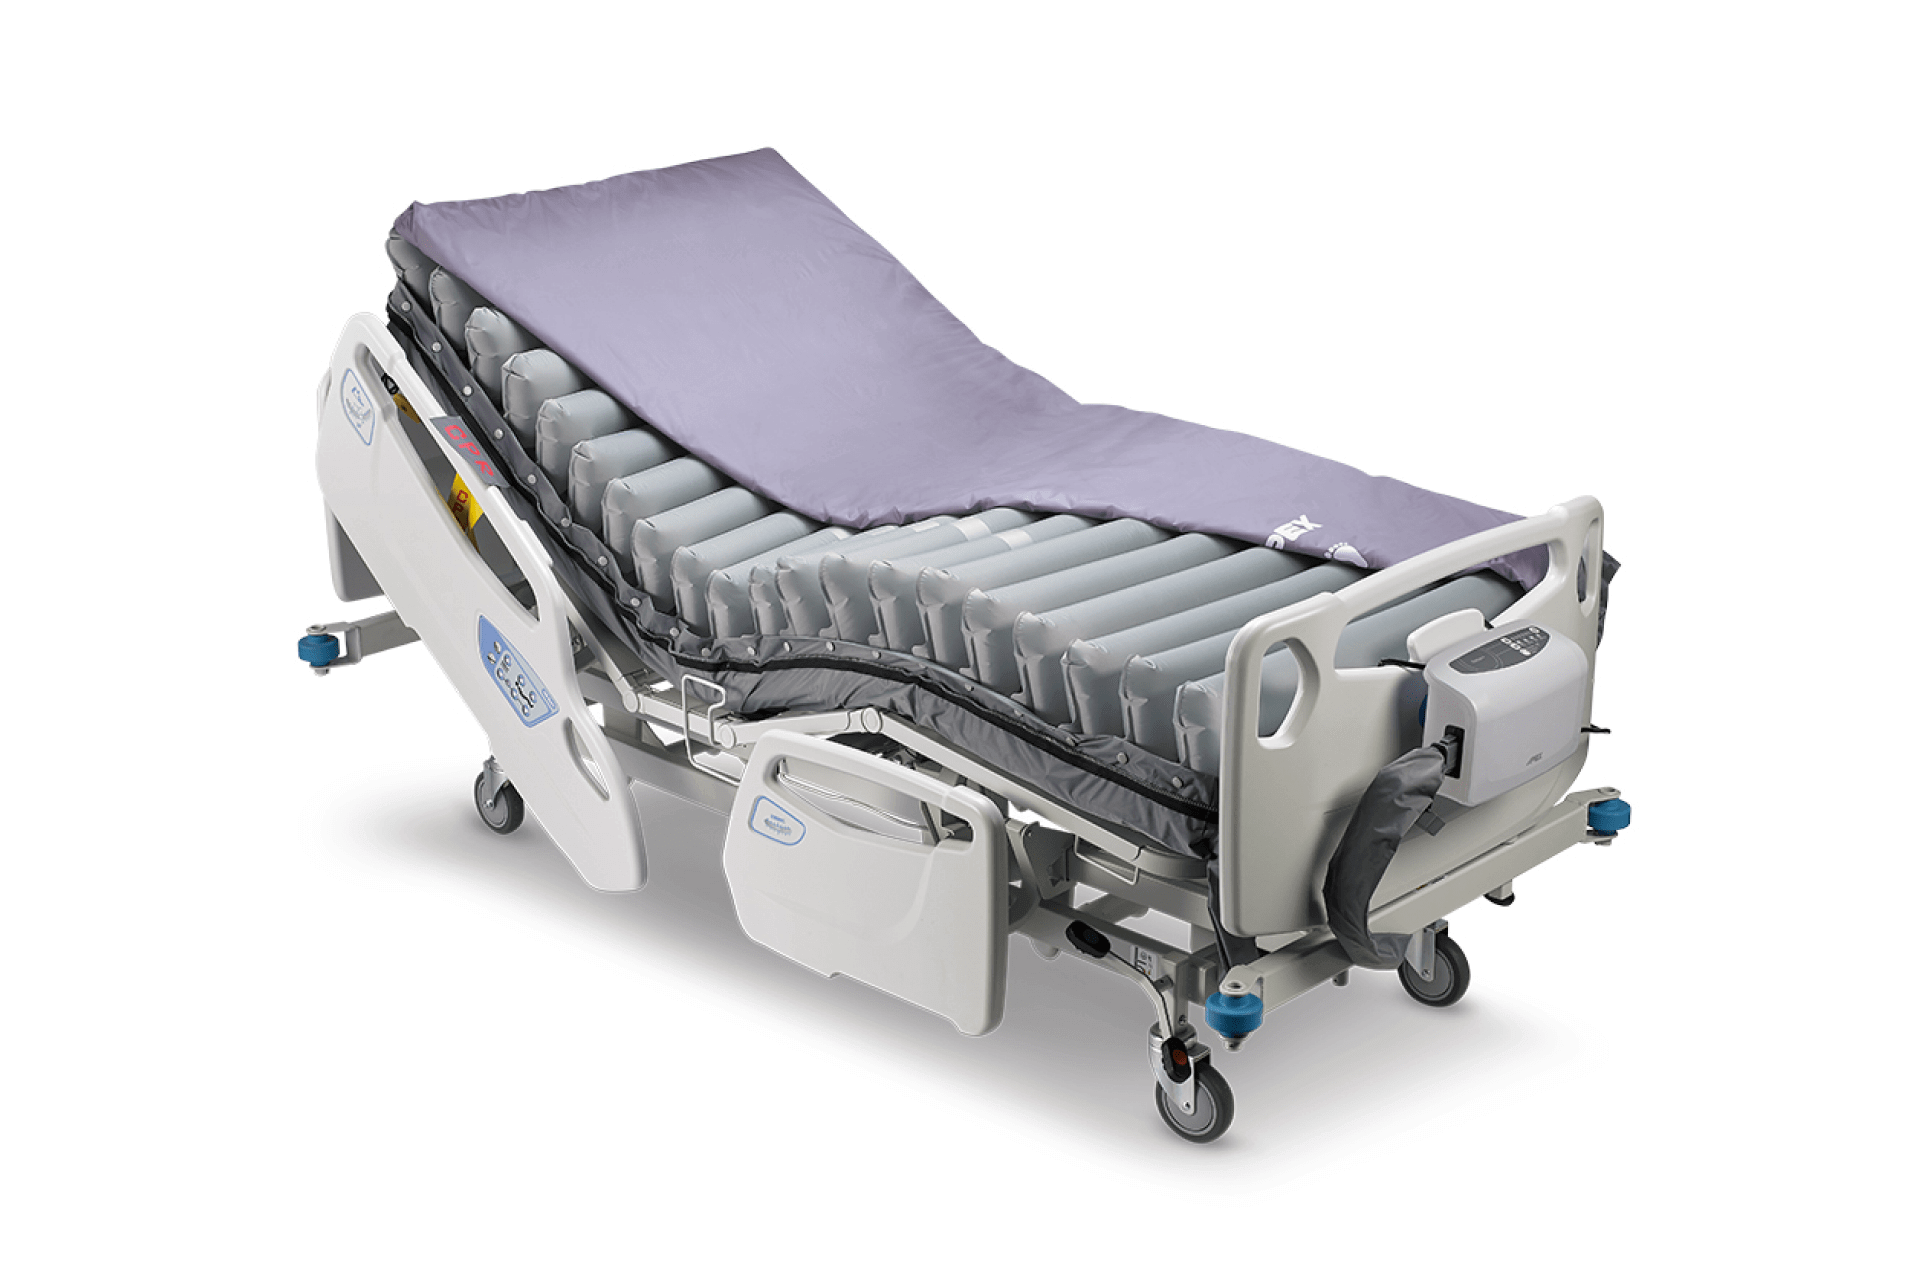 Domus 4 - Medical Bed - US Wellell